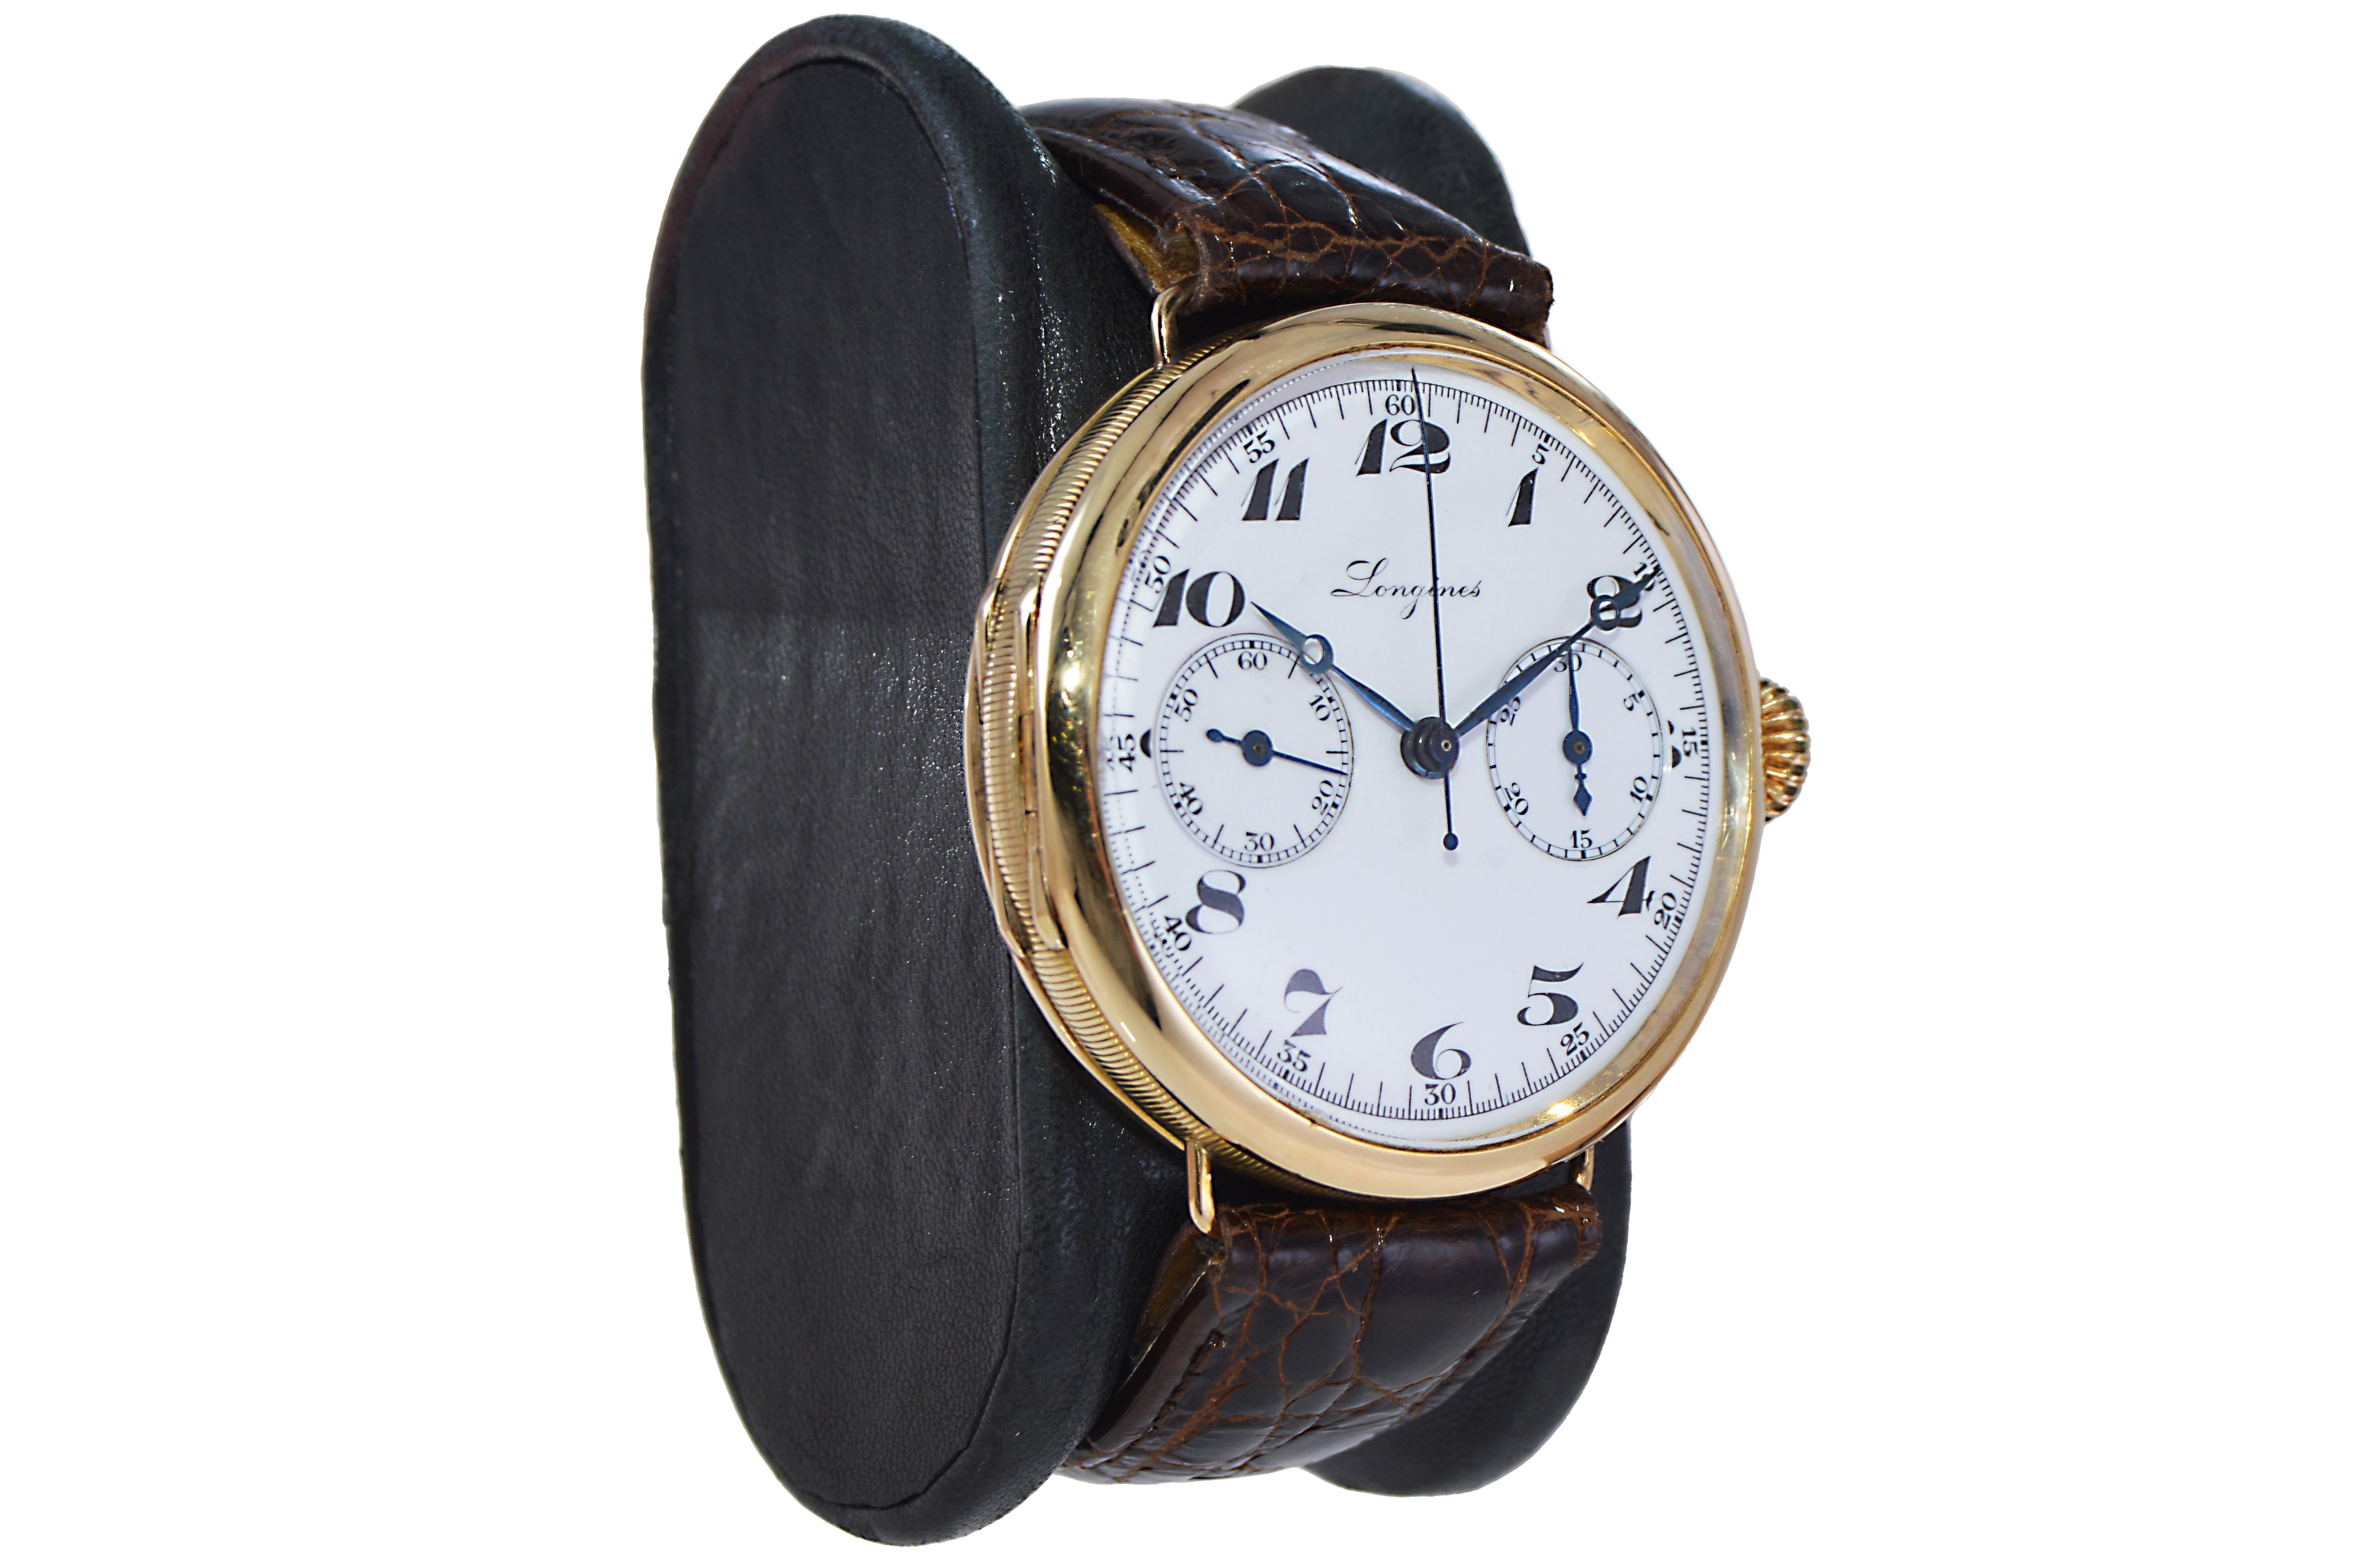 FACTORY / HOUSE: Longines Watch Company
STYLE / REFERENCE: Campaign Style / Chronograph
METAL / MATERIAL: 14 Kt. Solid Gold 
DIMENSIONS: Length 41mm X Diameter 39mm
CIRCA / YEAR: 1933 
MOVEMENT / CALIBER: Manual Winding / 17 Jewels  
DIAL / HANDS: